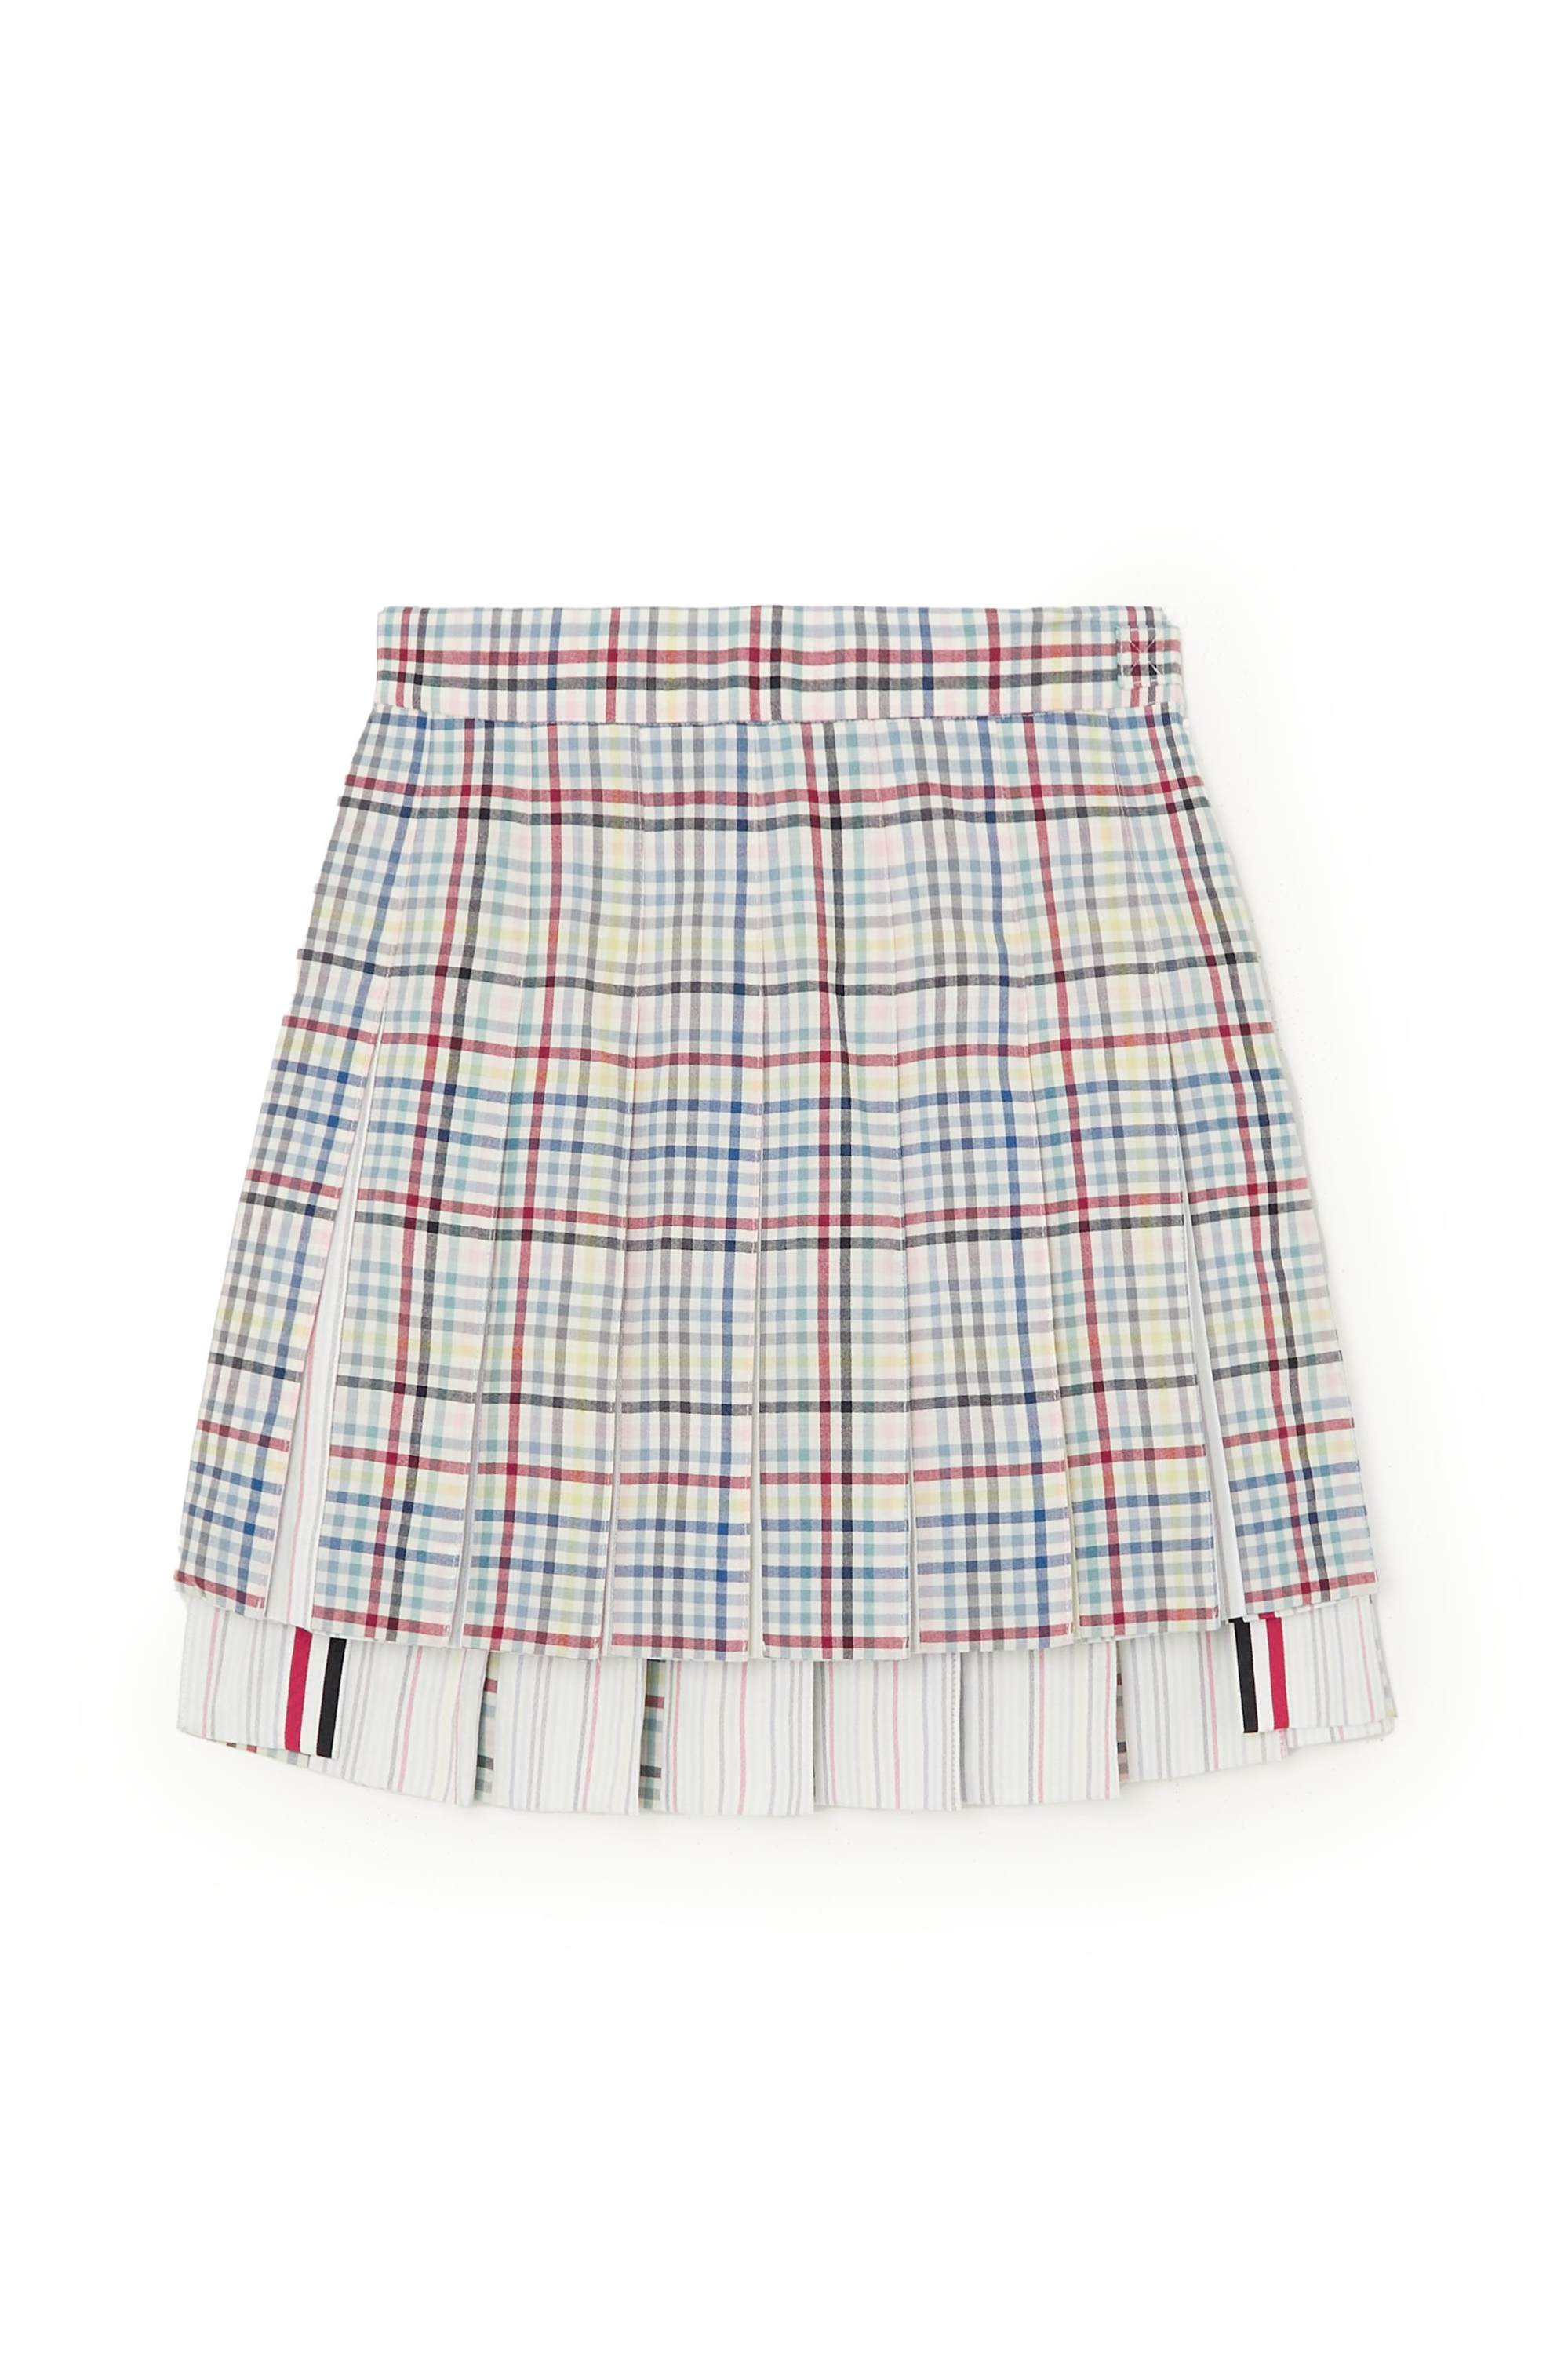 Pleated miniskirts are officially a thing, here’s 4 to try: Olivia ...